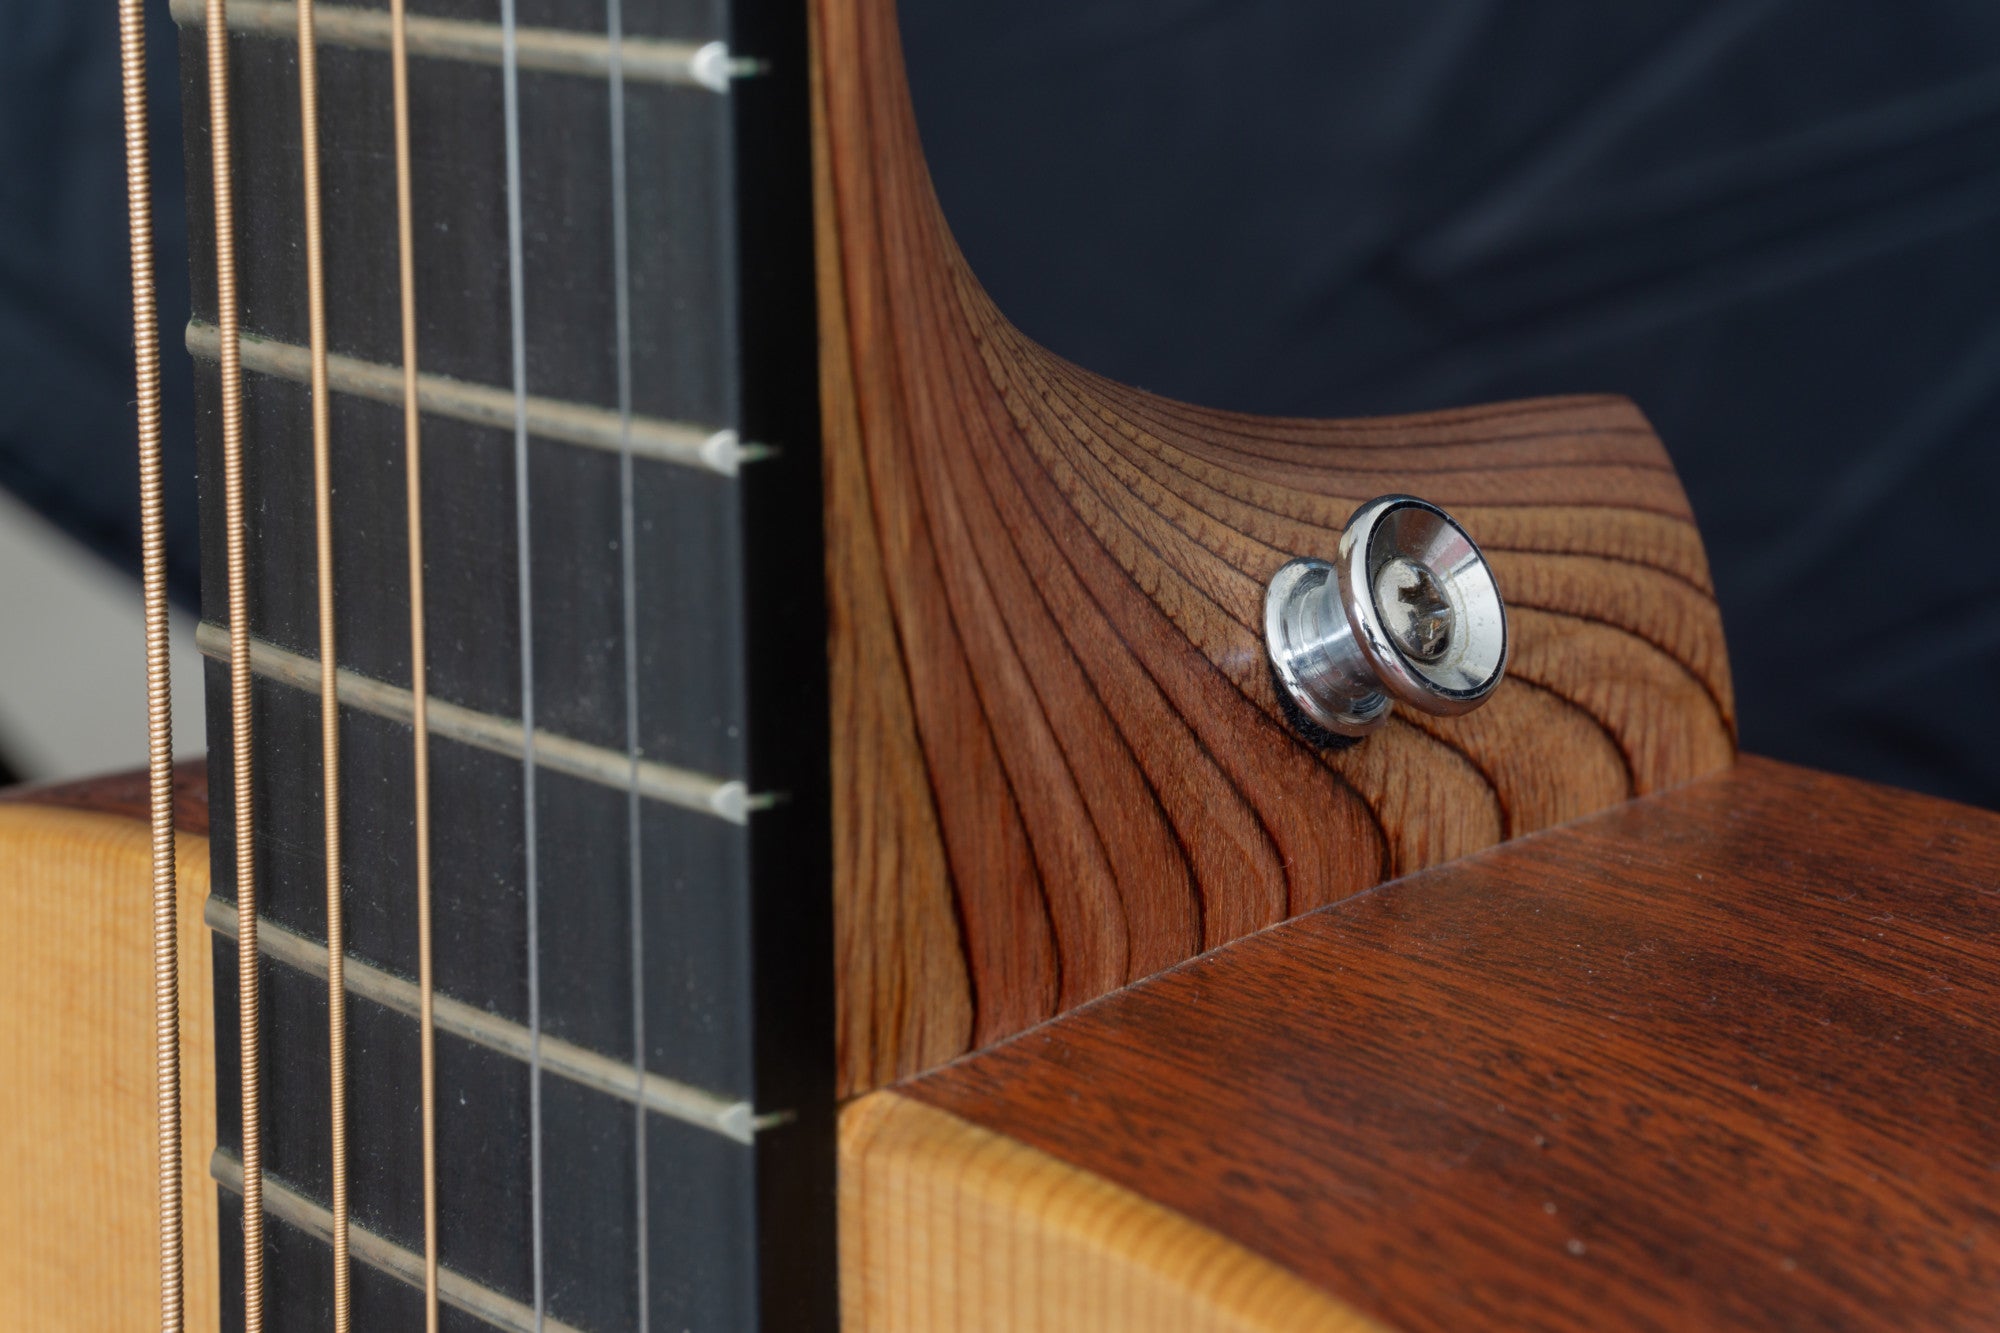 Why does my guitar only have one strap peg? - Quora